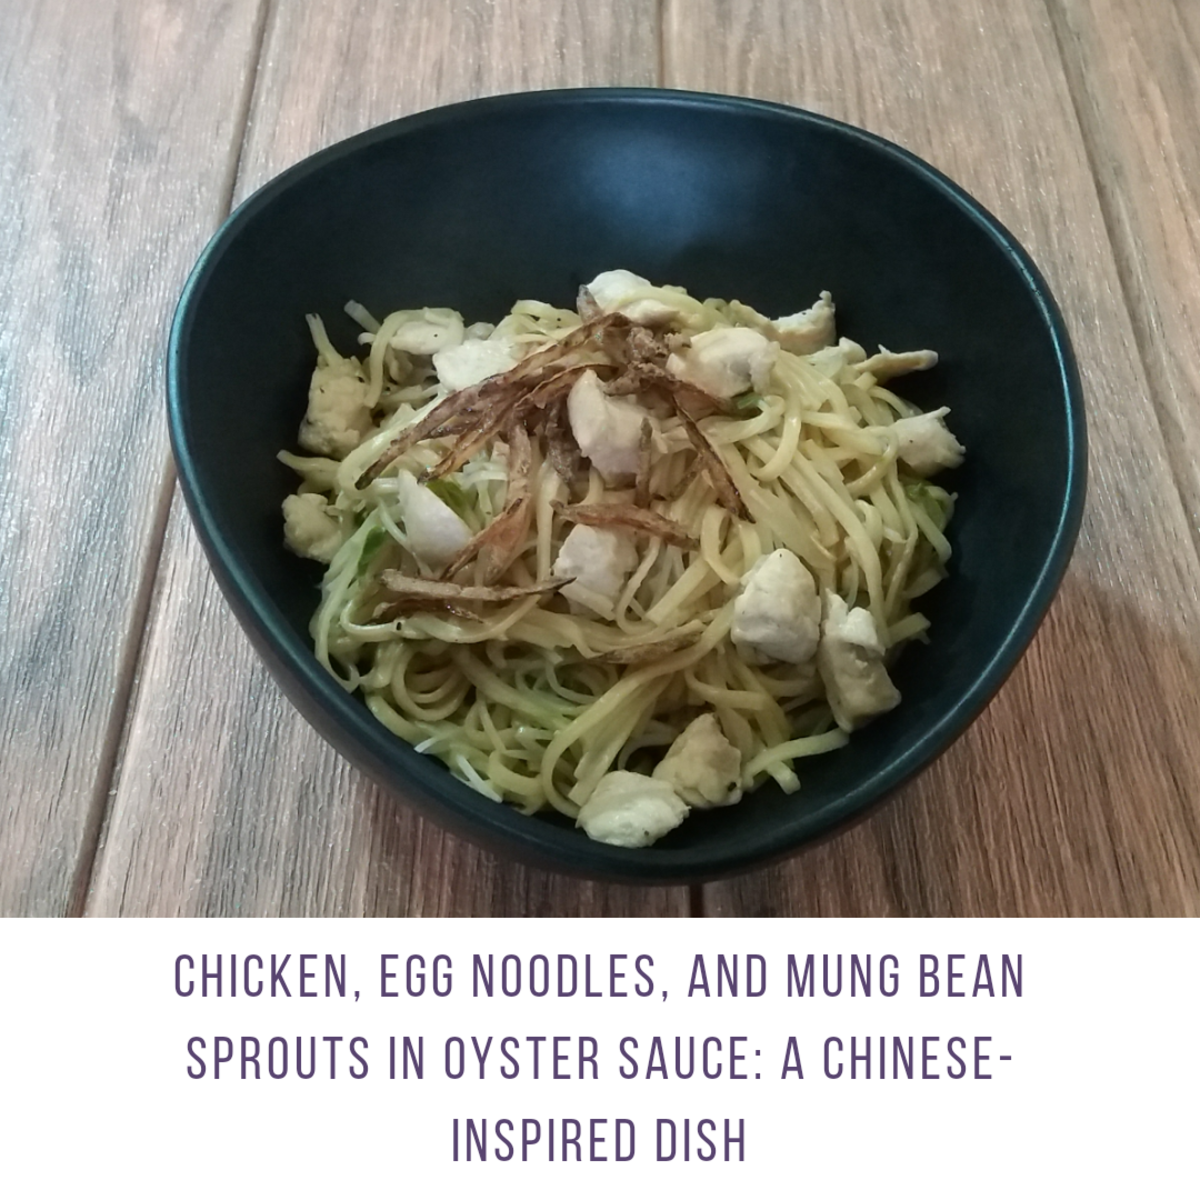 Chinese-Style Egg Noodles With Chicken and Mung Bean Sprouts